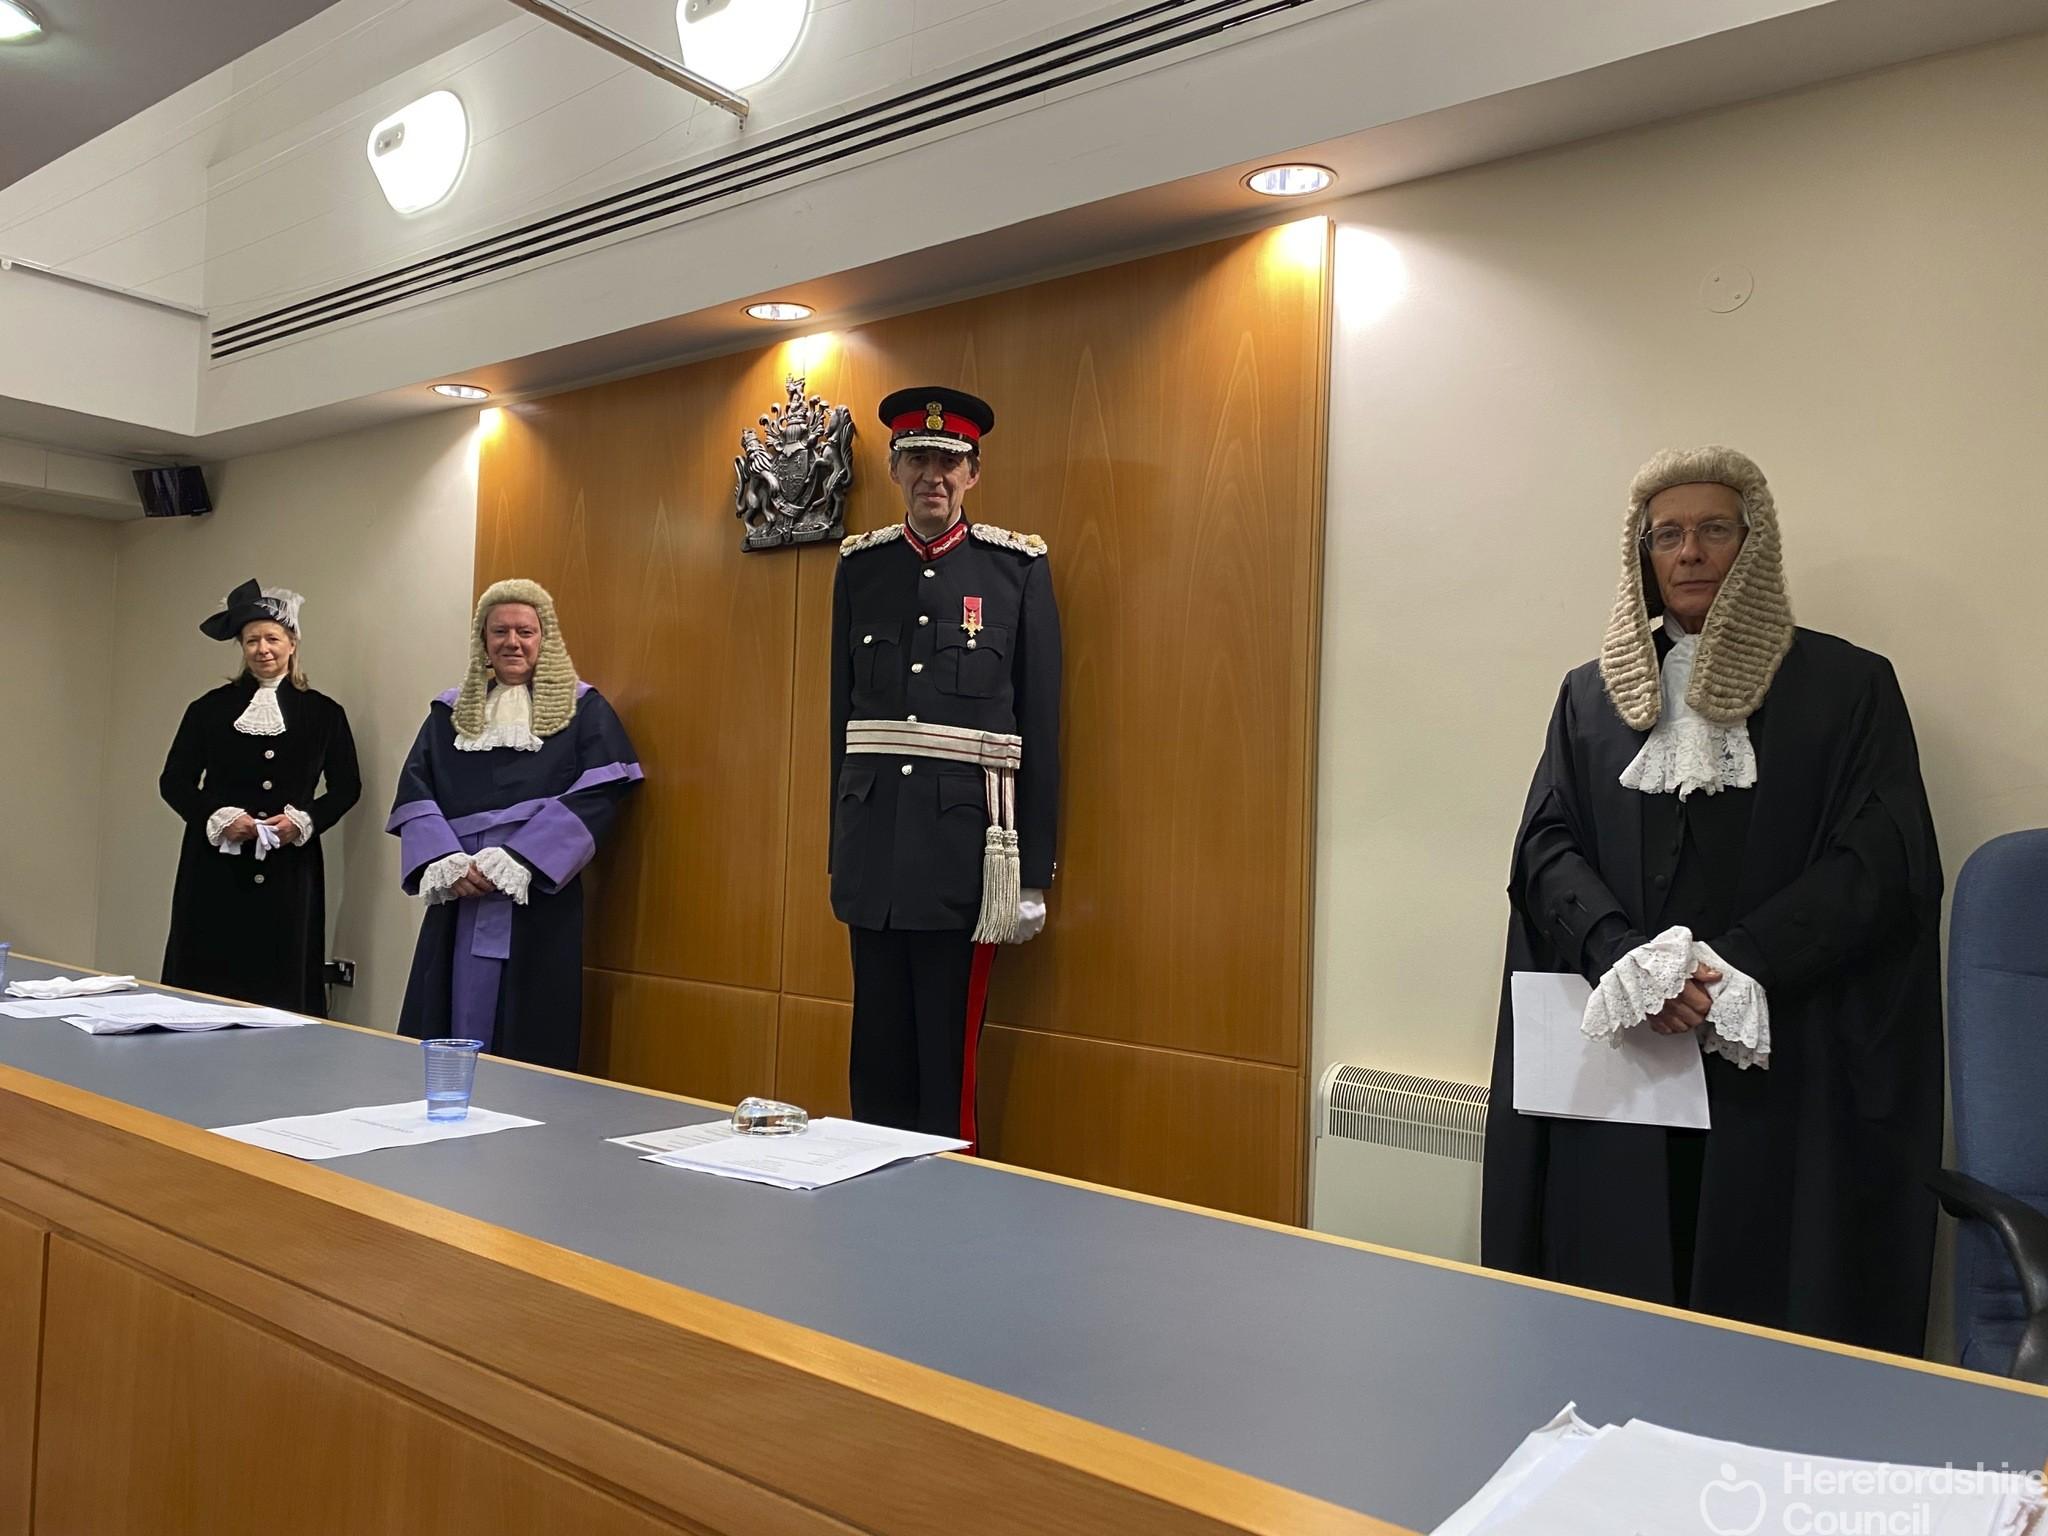 Herefordshire Magistrates Swearing-in Ceremony – 11 December 2020